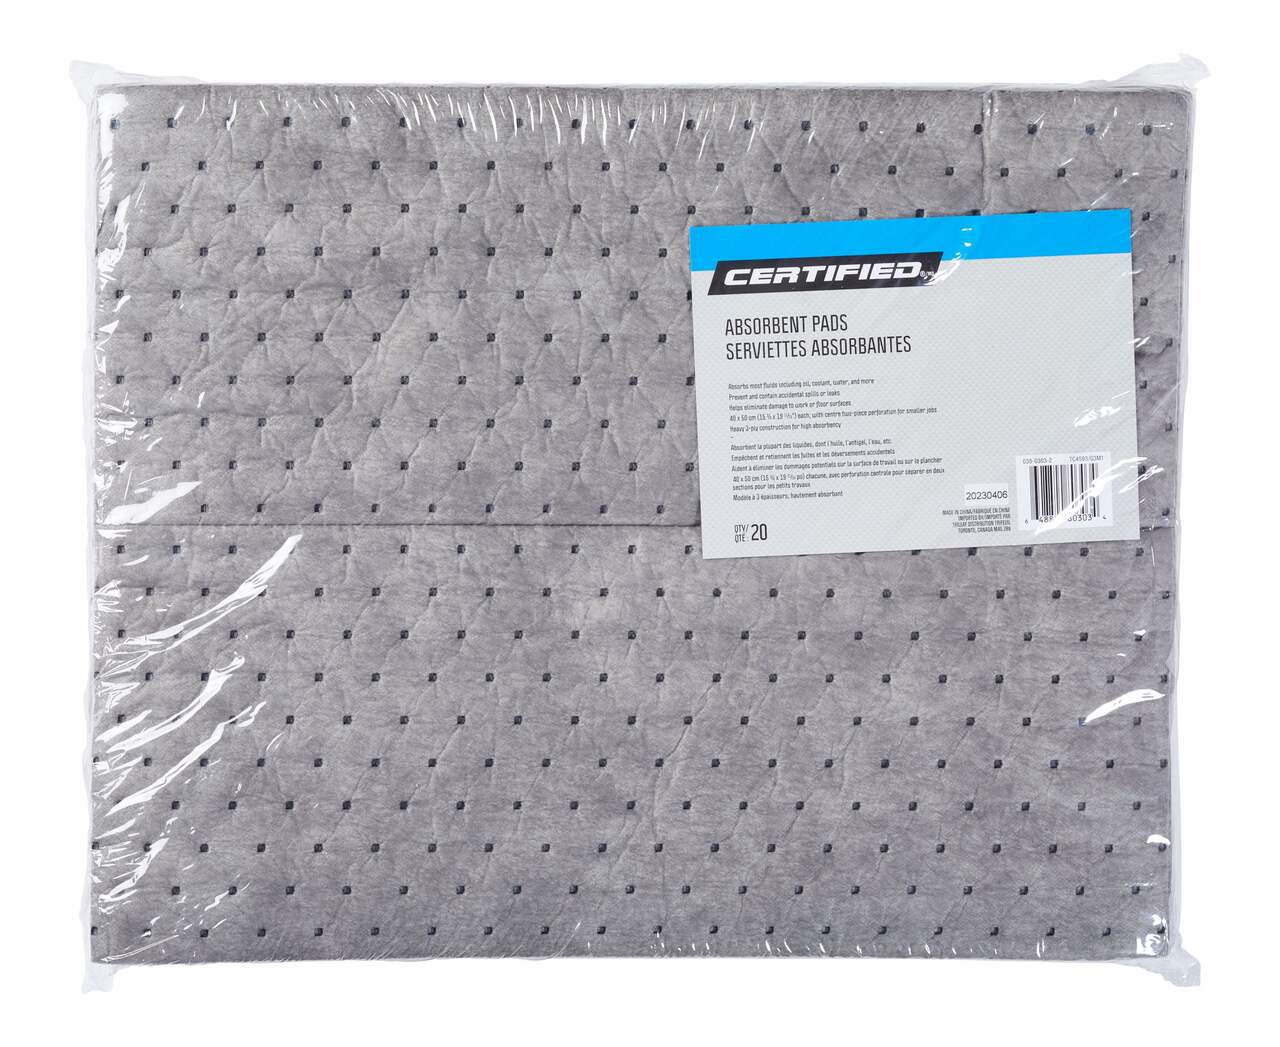 RS PRO Chemical Spill Absorbent Pad 90 L Capacity, 100 Per Package